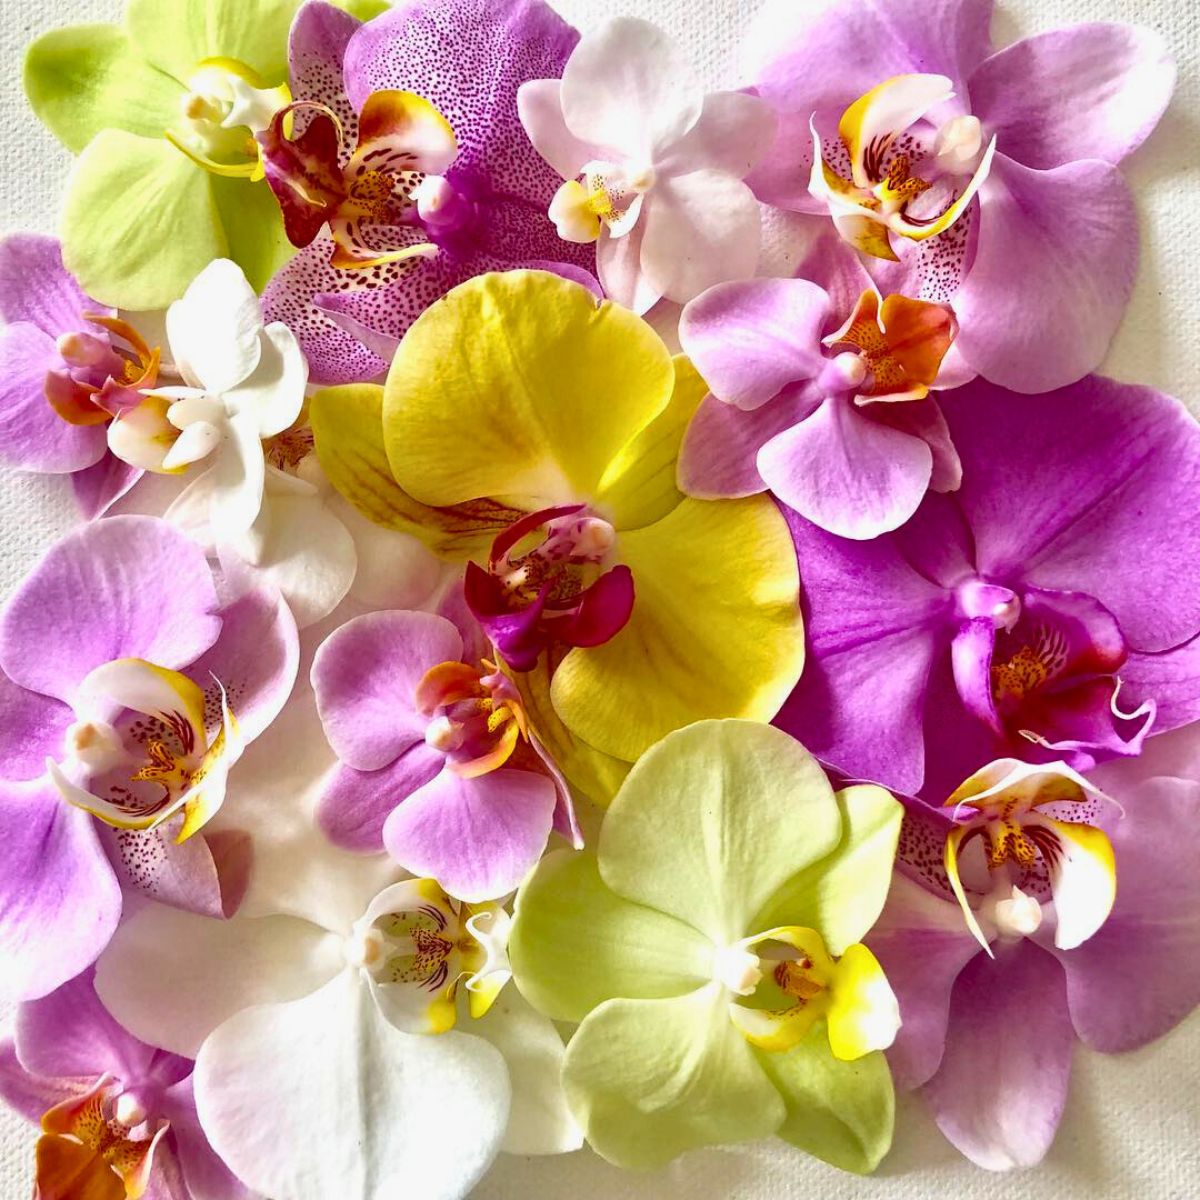 Different colored orchids